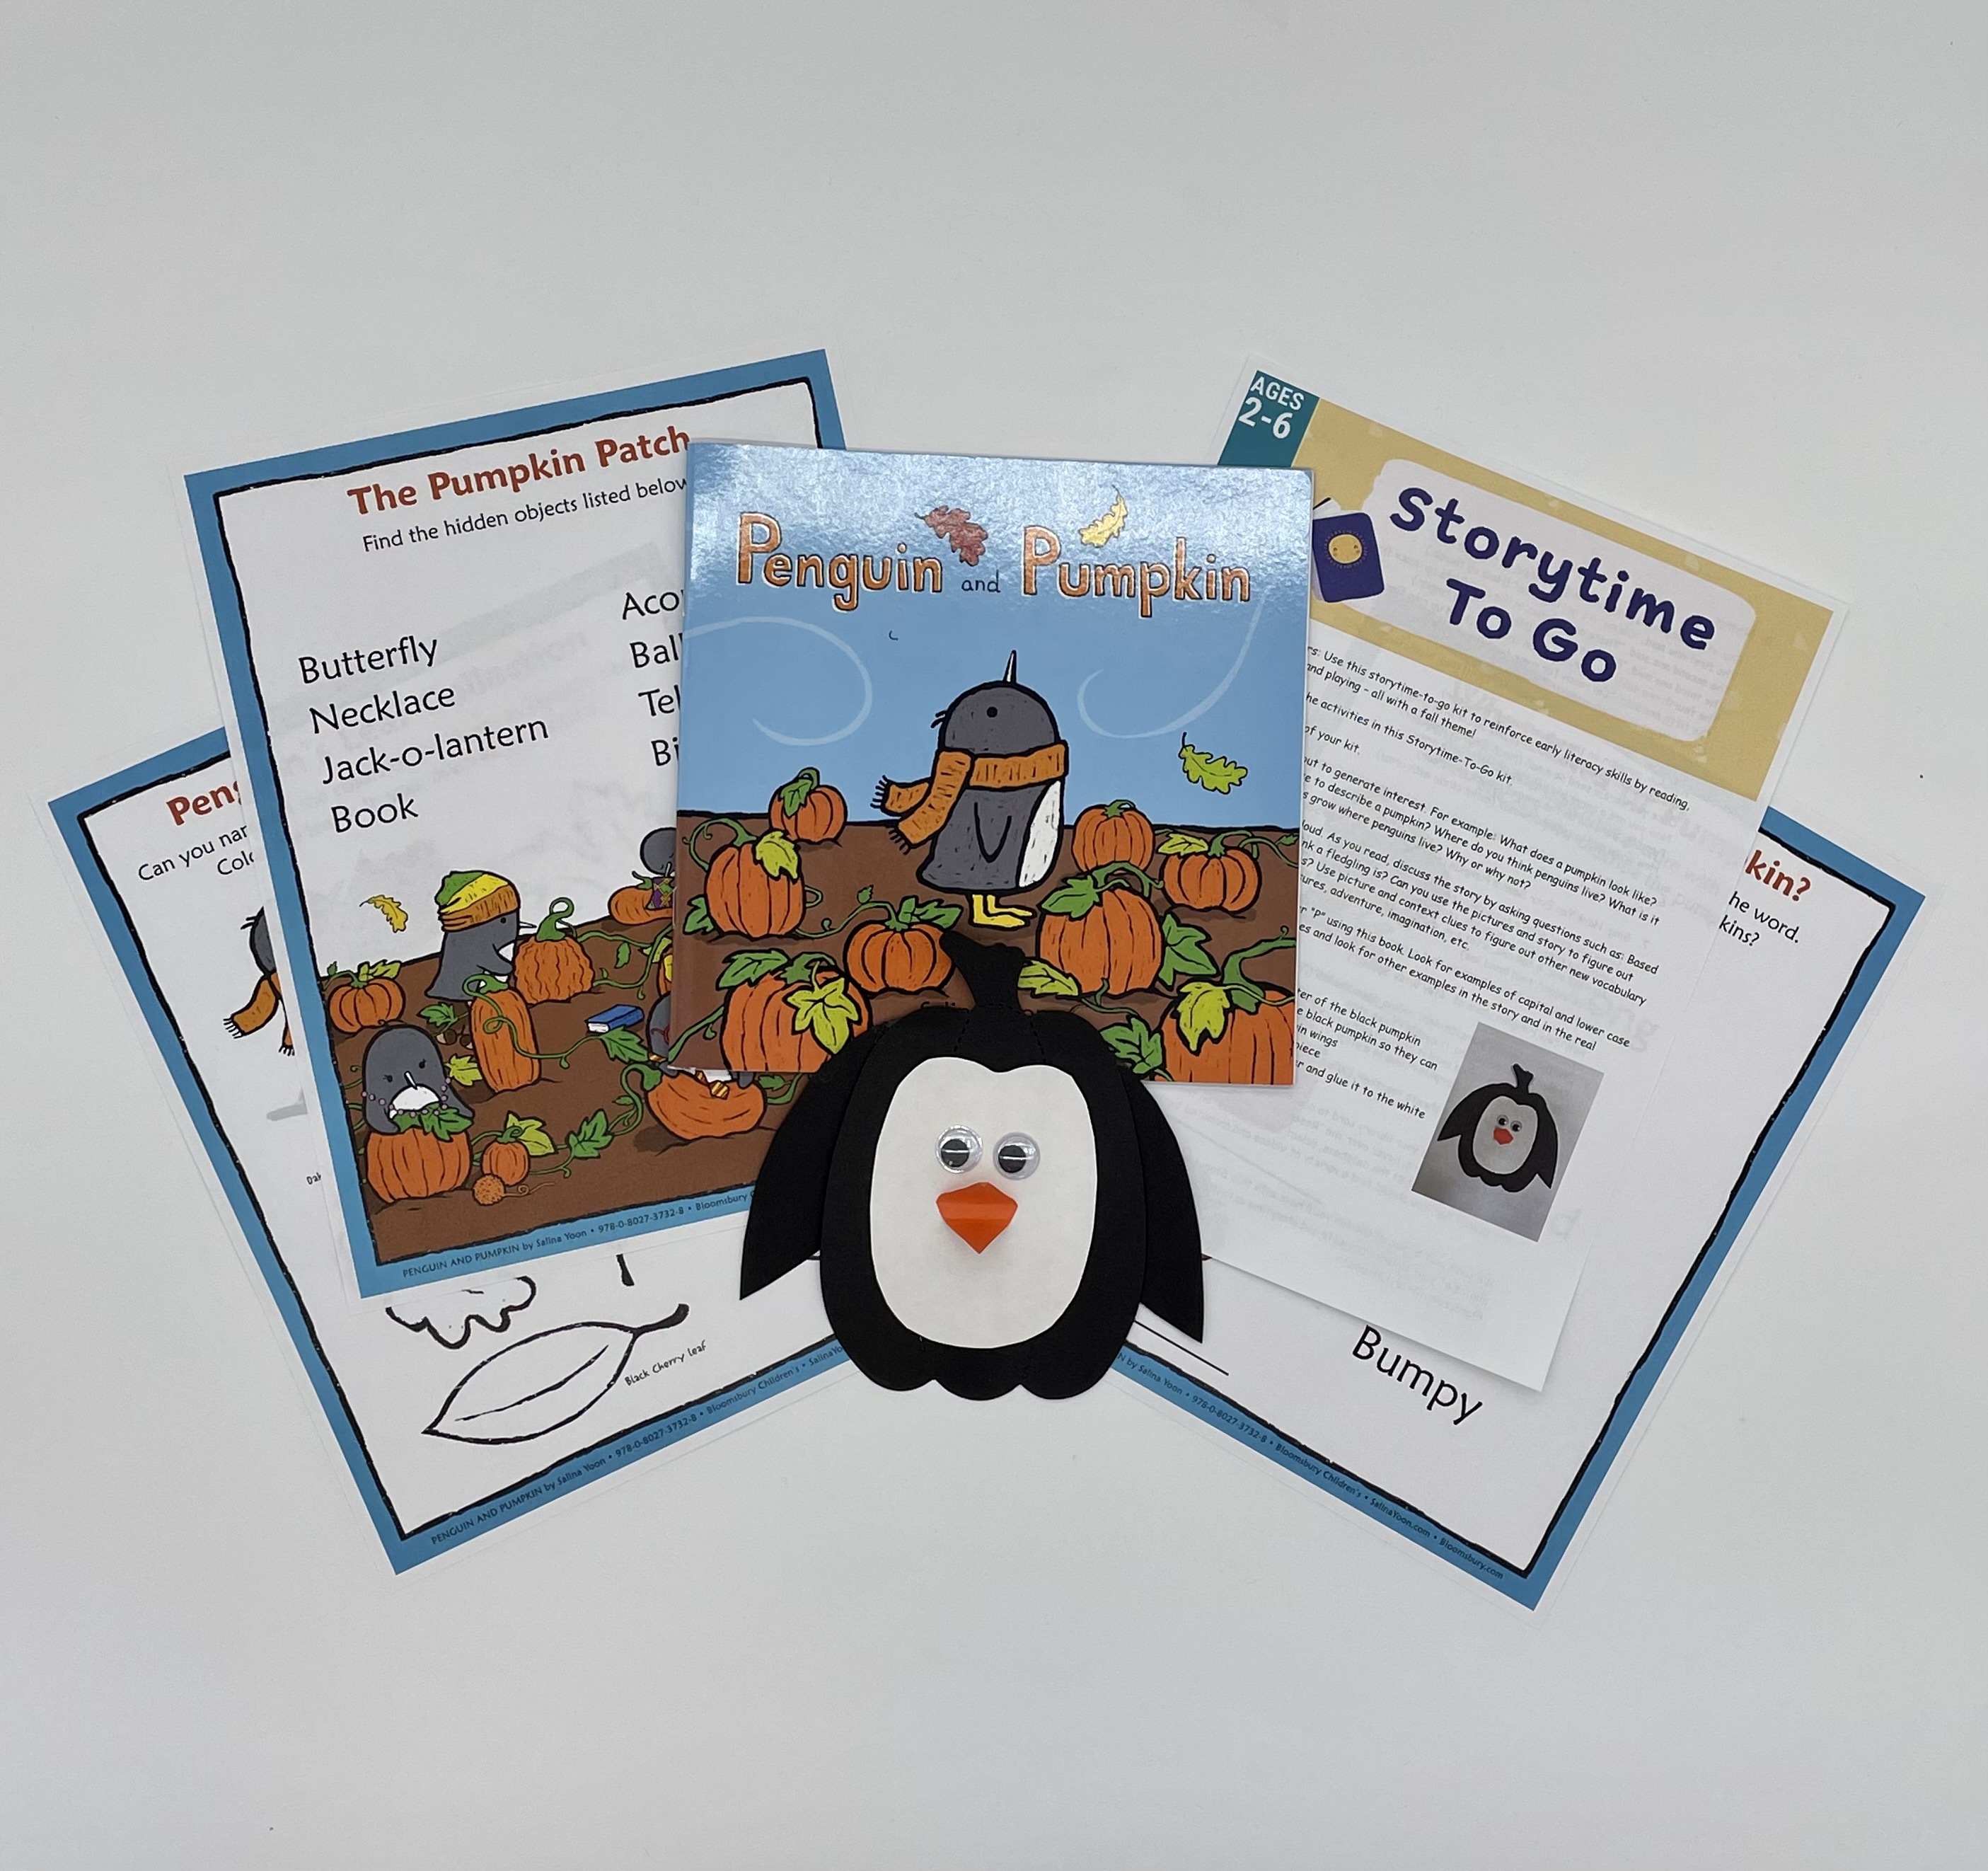 Storytime To Go: Penguin and Pumpkin